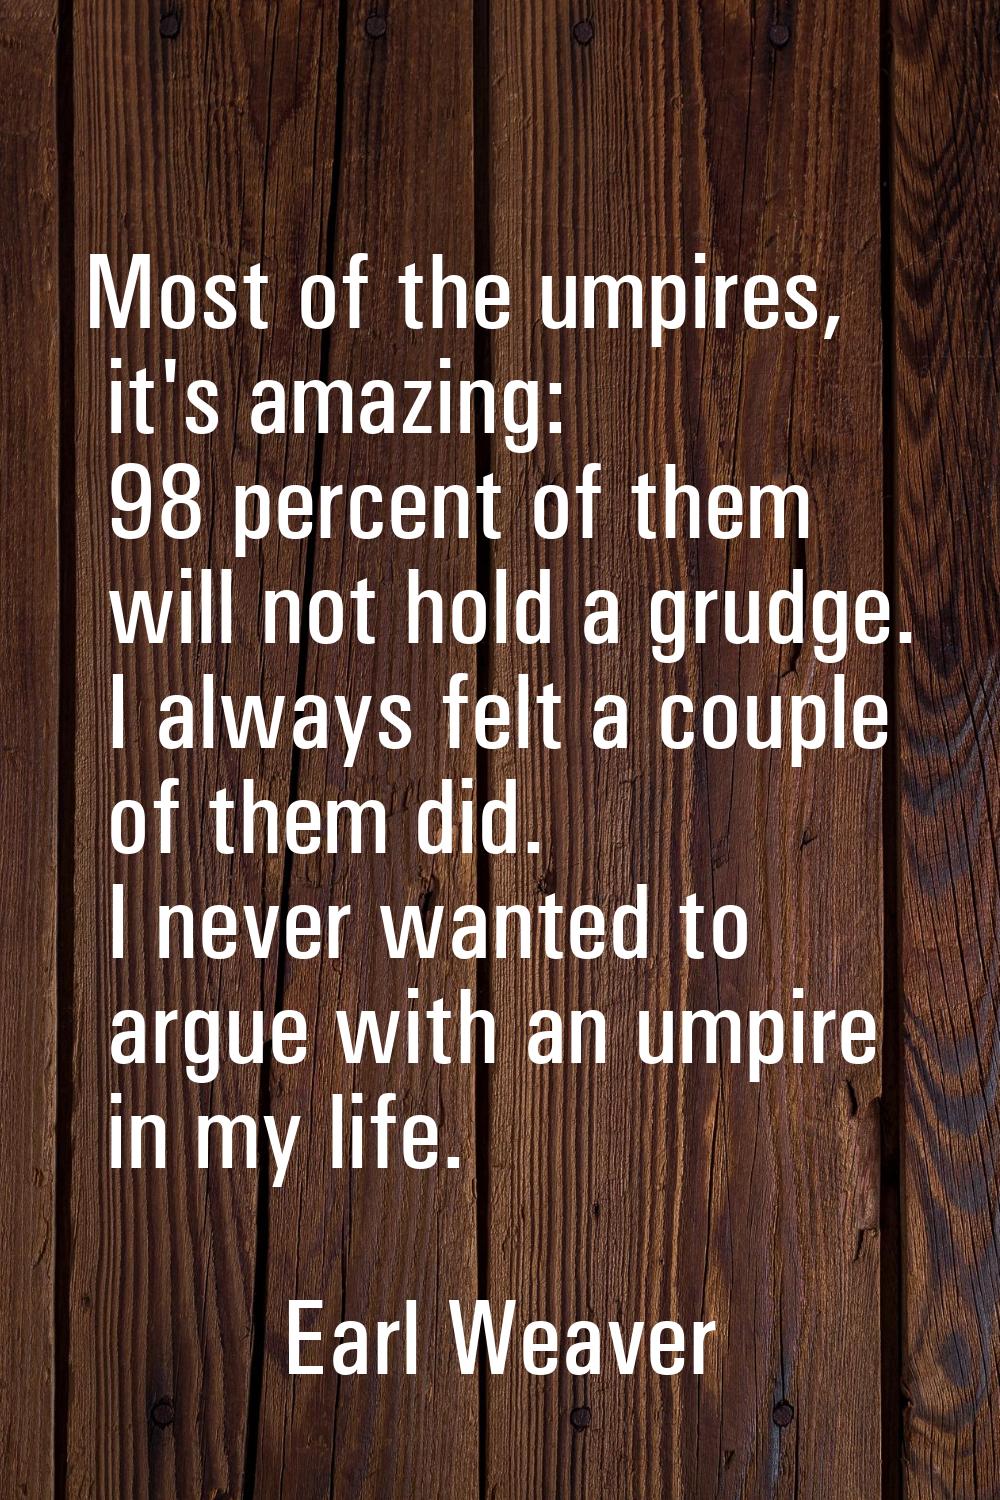 Most of the umpires, it's amazing: 98 percent of them will not hold a grudge. I always felt a coupl